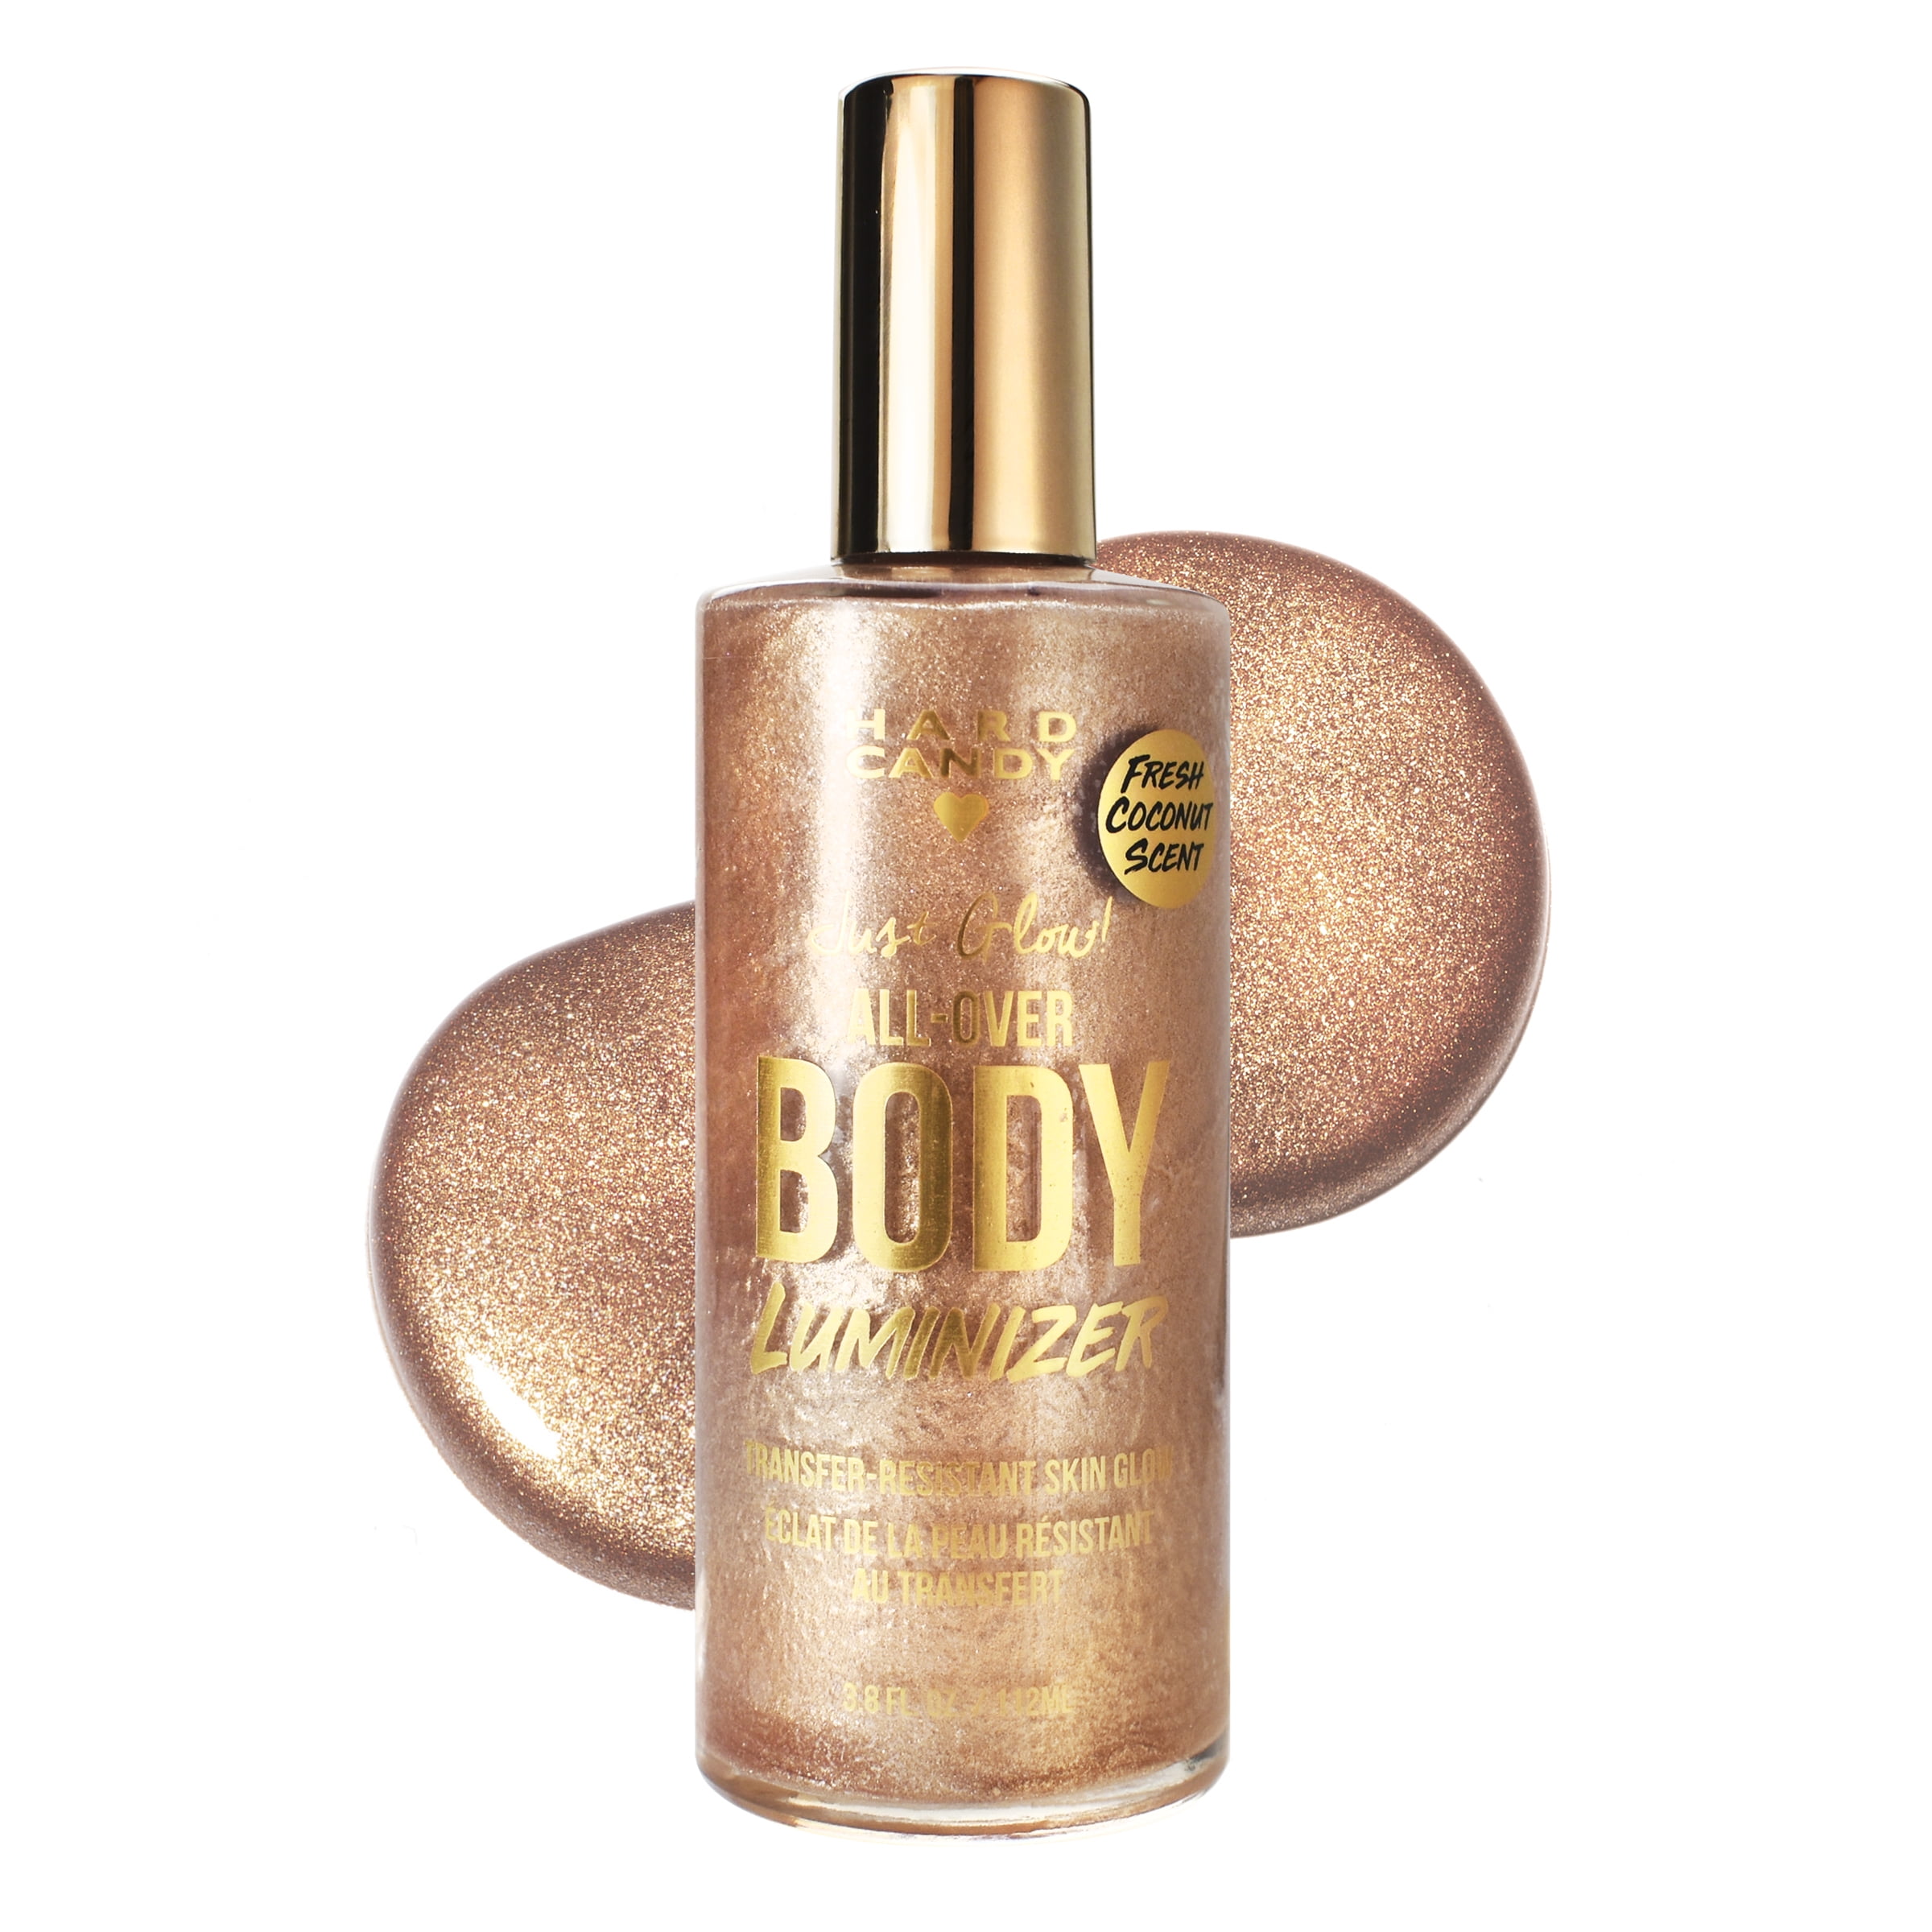 Hard Candy Sheer Envy All Over Body Luminizer, Champagne - Walmart.com